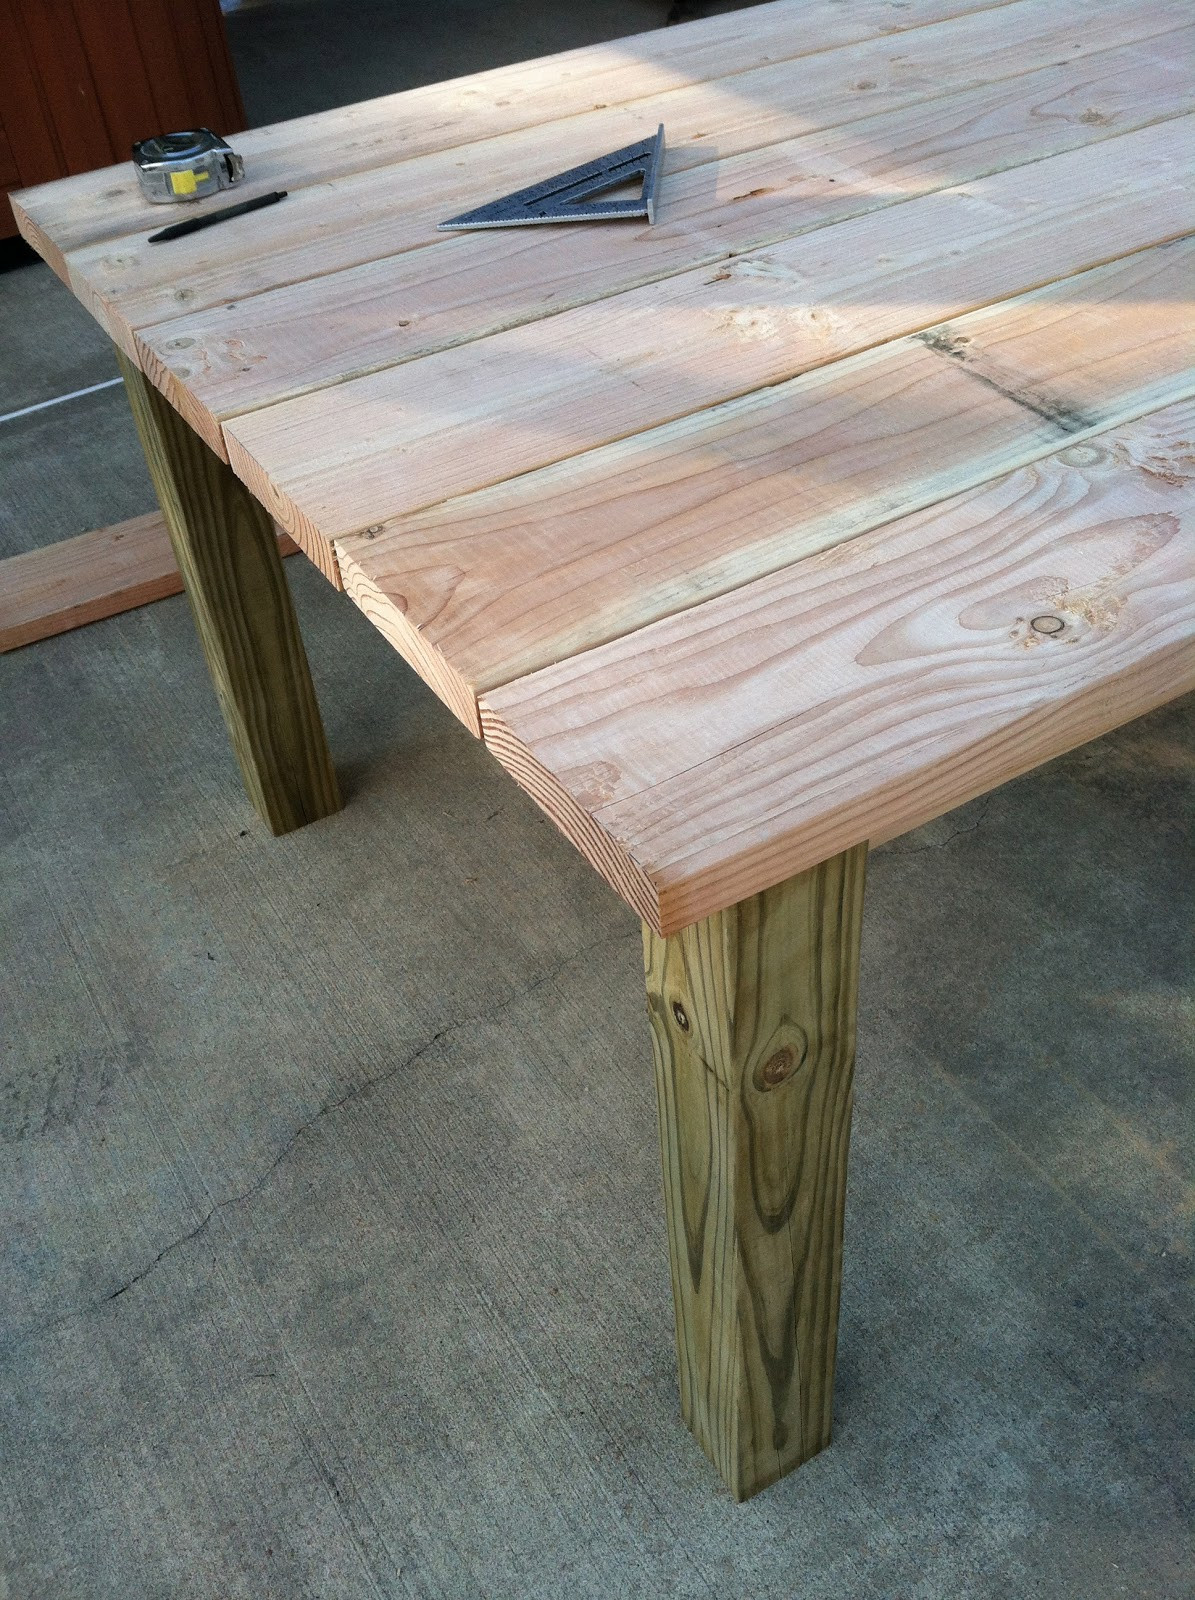 DIY Outdoor Table
 Pine Tree Home Building My Own Outdoor Wood Farm Table